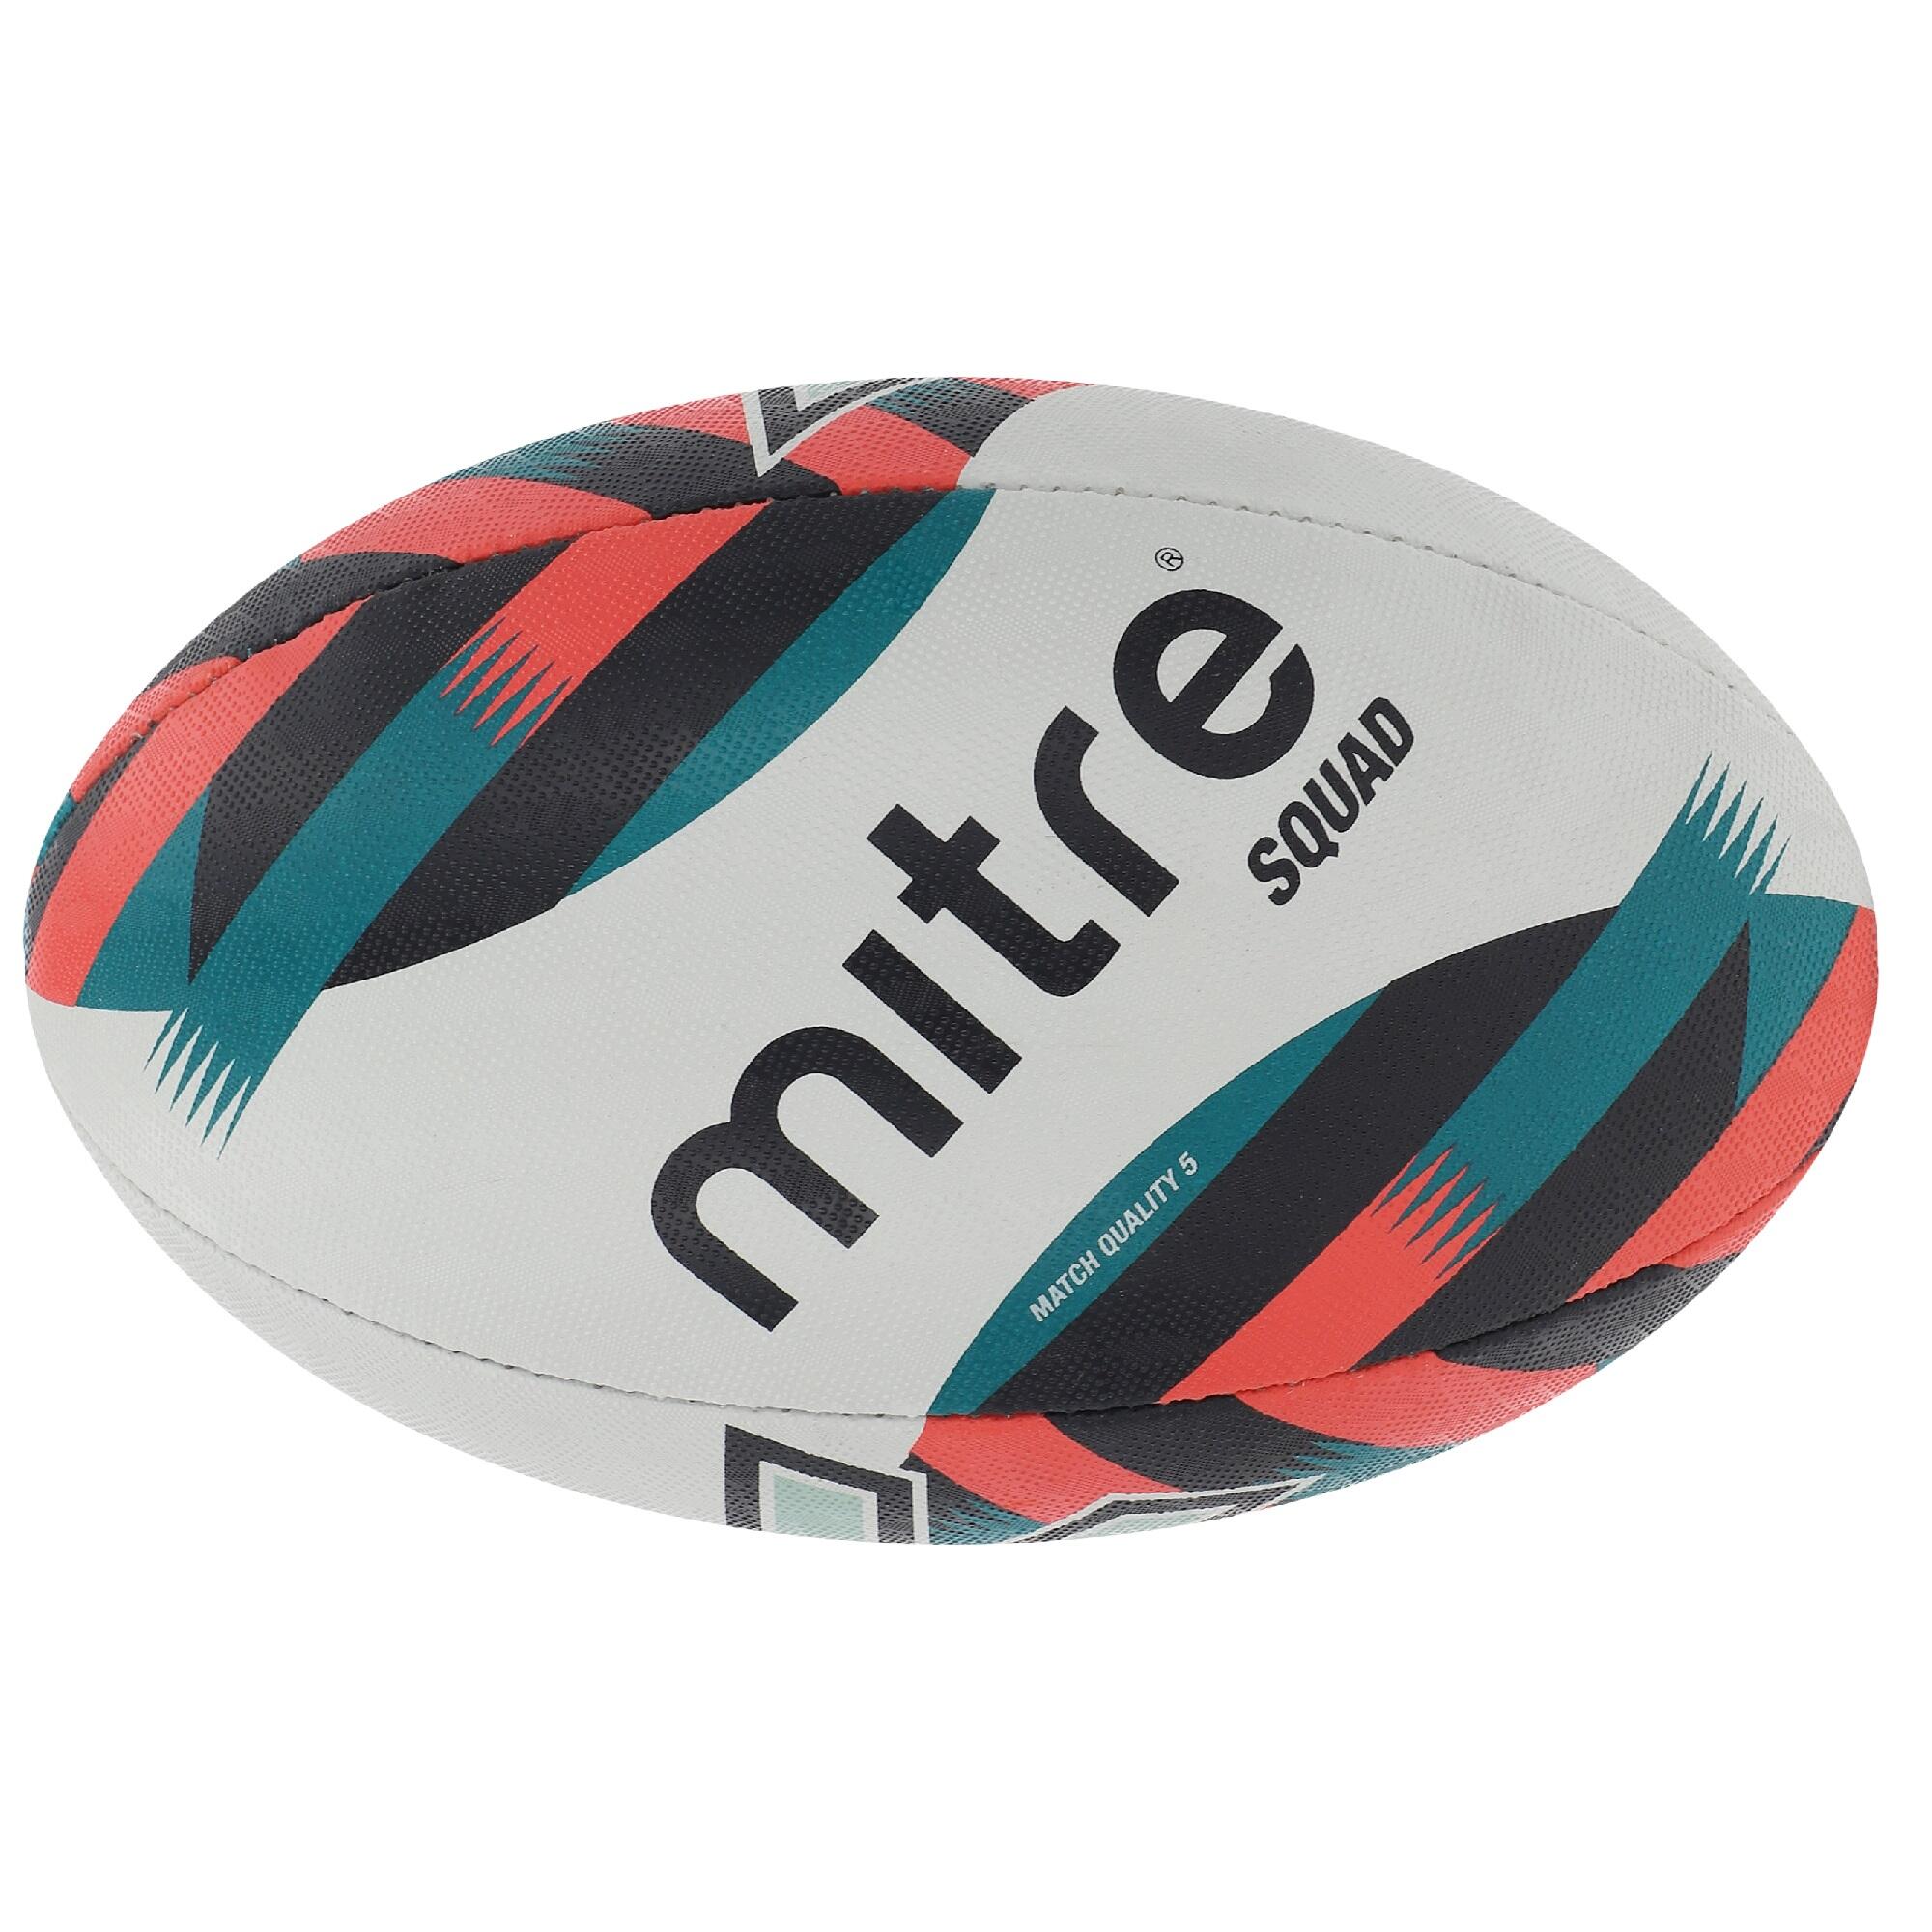 Squad Rugby Ball (White/Red/Blue) 1/4